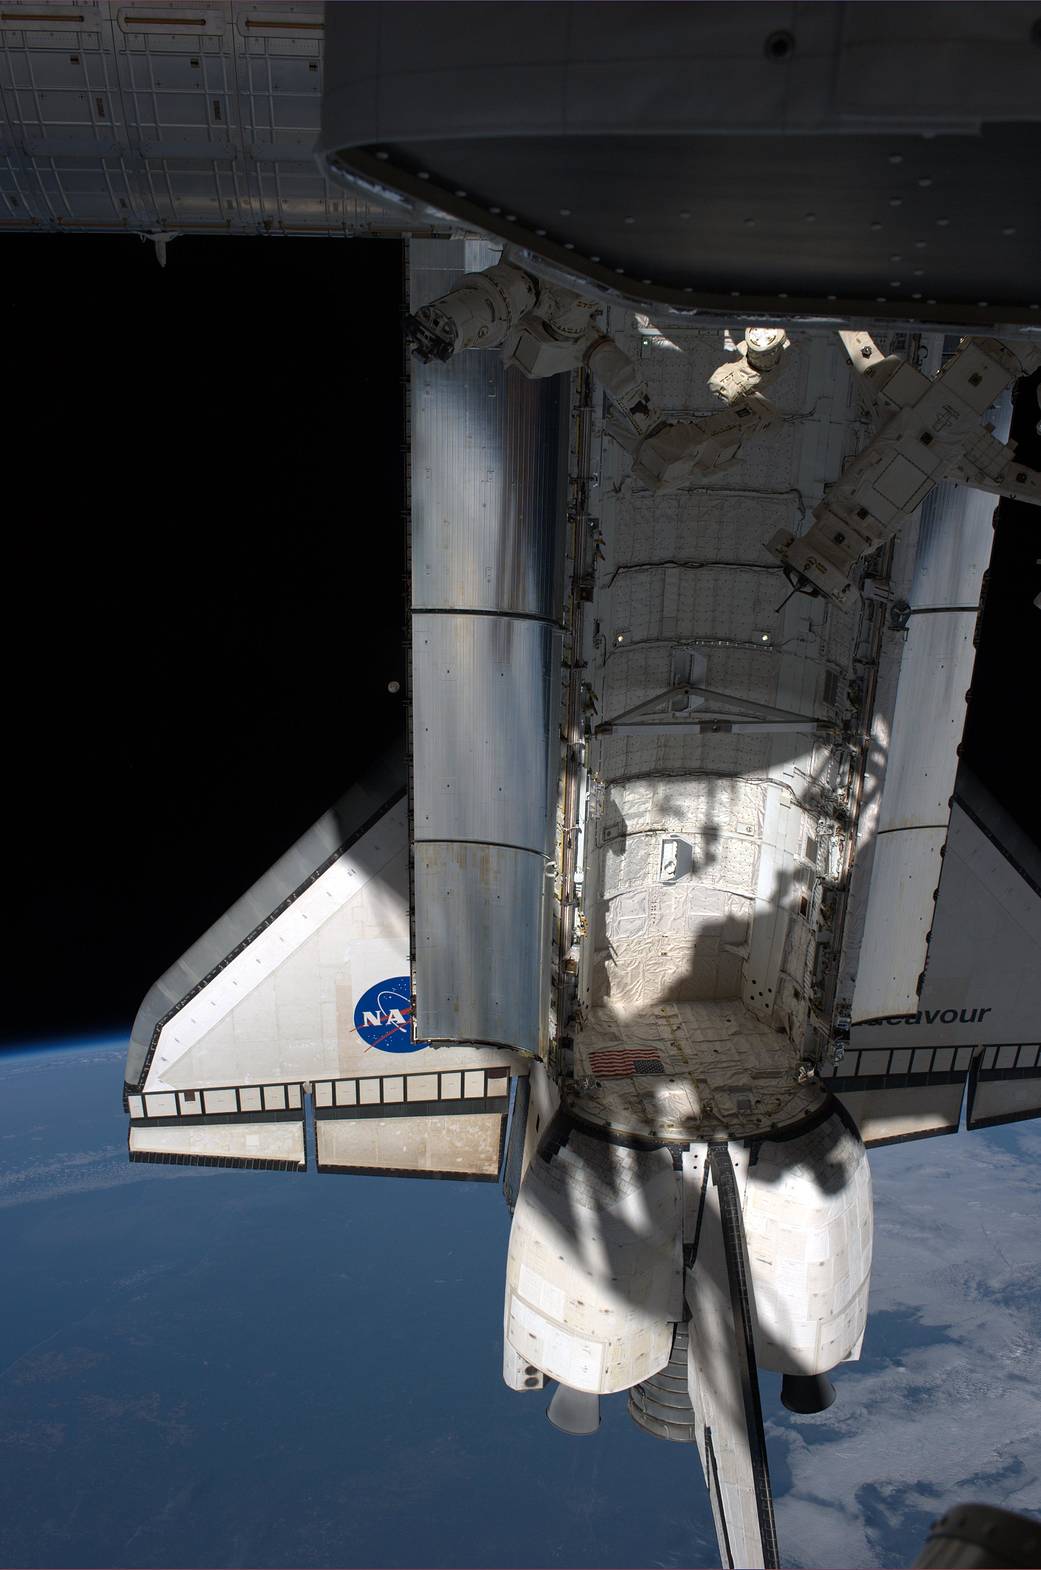 Endeavour at the International Space Station